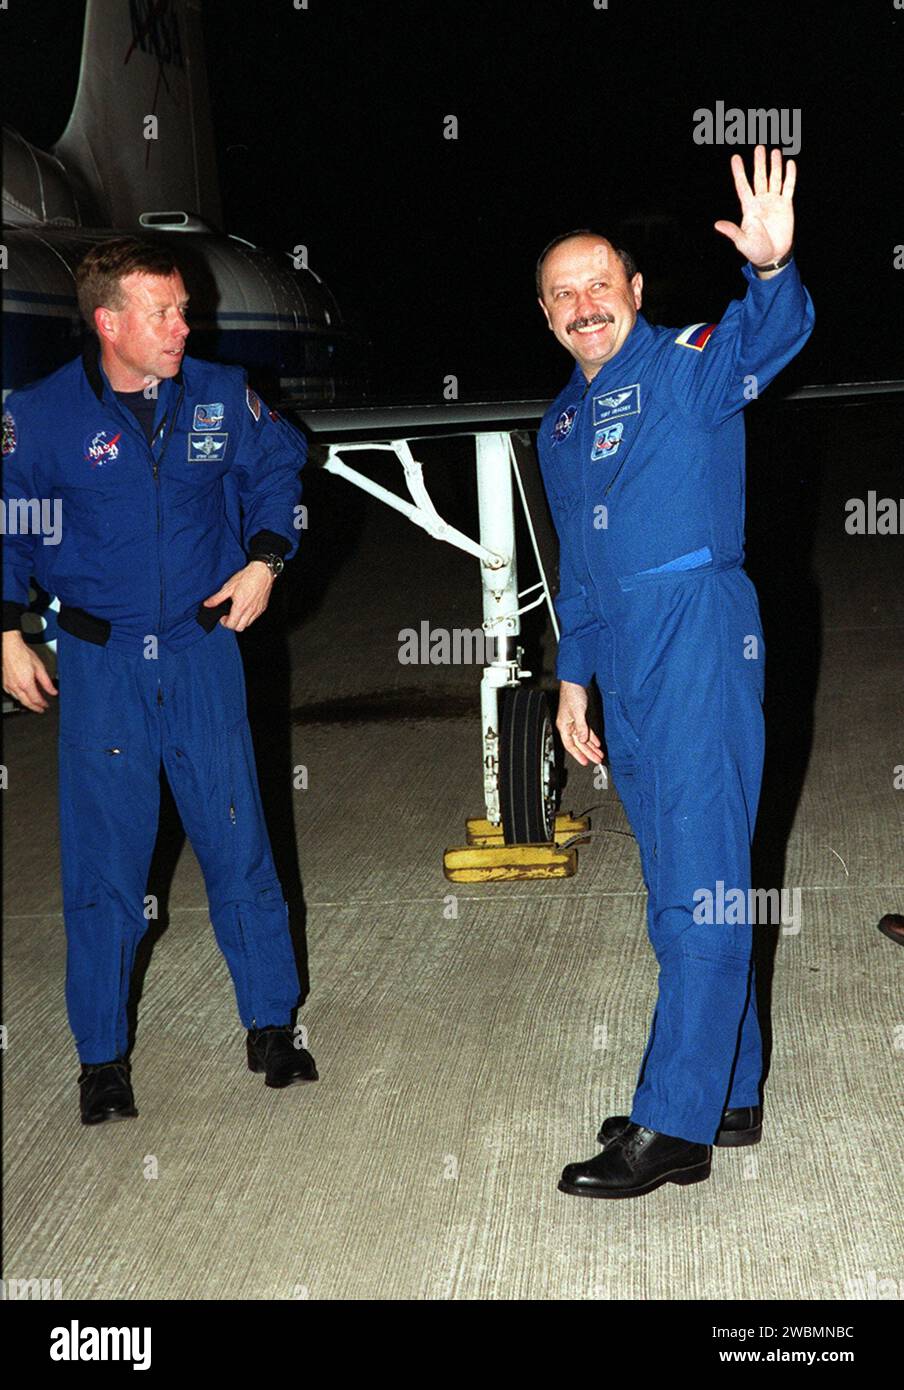 After landing at KSC’s Shuttle Landing Facility, Russian cosmonaut and STS-102 Mission Specialist Yury Usachev (right) waves to the media. Pilot James Kelly (left) is ready to join the other crew members at the microphone. The crew comprises Commander James Wetherbee, Kelly, and Mission Specialists Andrew Thomas, Paul Richards, James Voss, Susan Helms and Usachev. Helms, Usachev and Voss are also the Expedition Two crew replacing Expedition One on the International Space Station. STS-102 will be carrying the Multi-Purpose Logistics Module Leonardo, the primary delivery system used to resupply Stock Photo